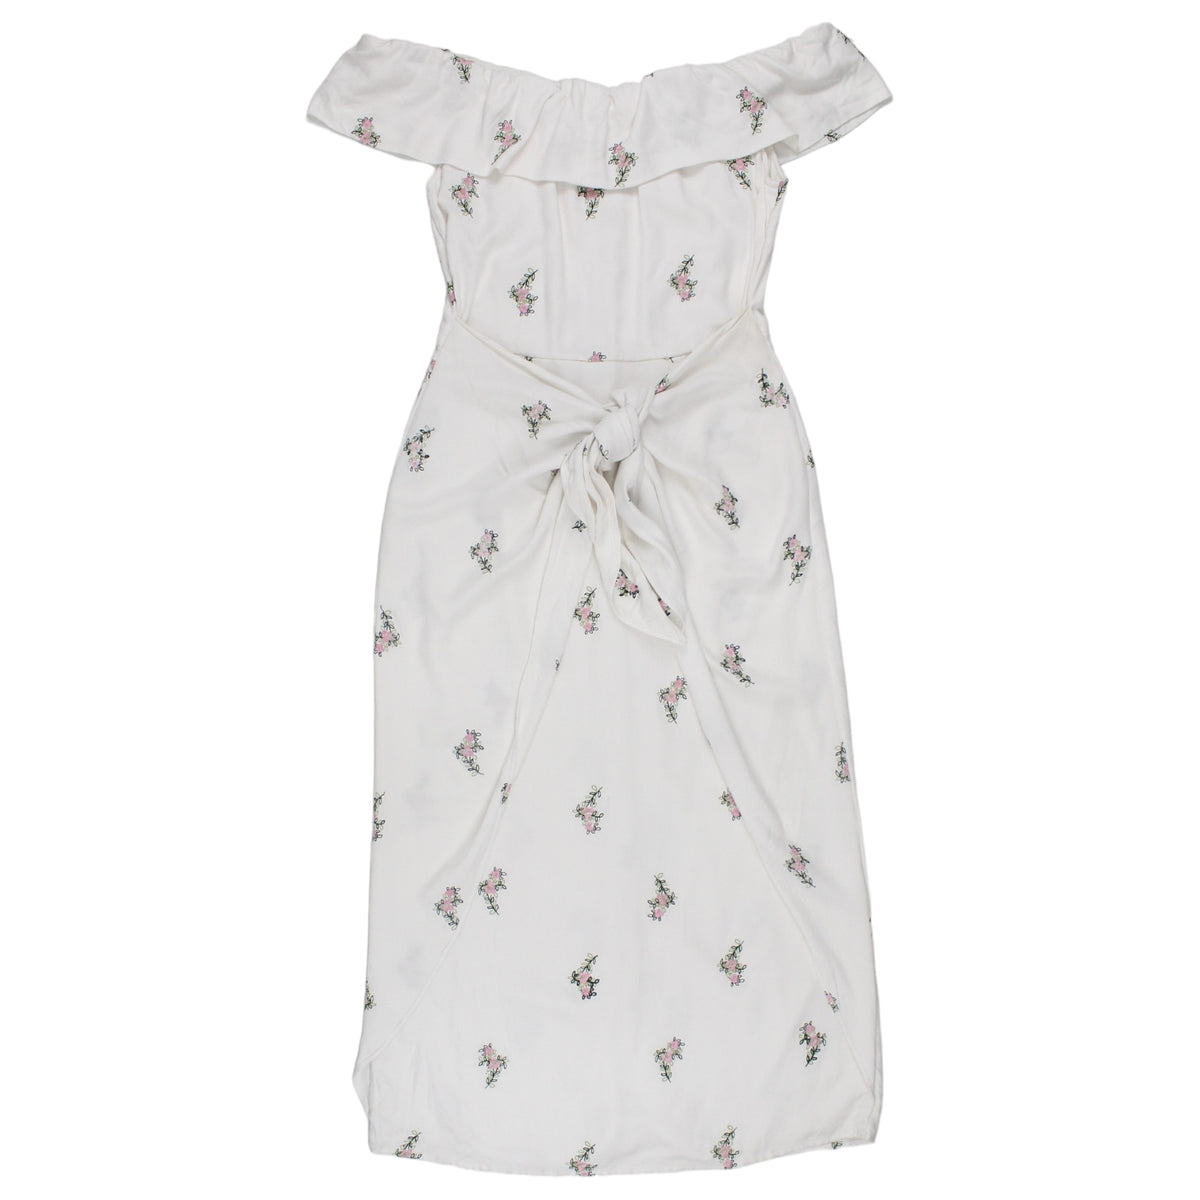 House of Holland White Floral Embroidered Dress